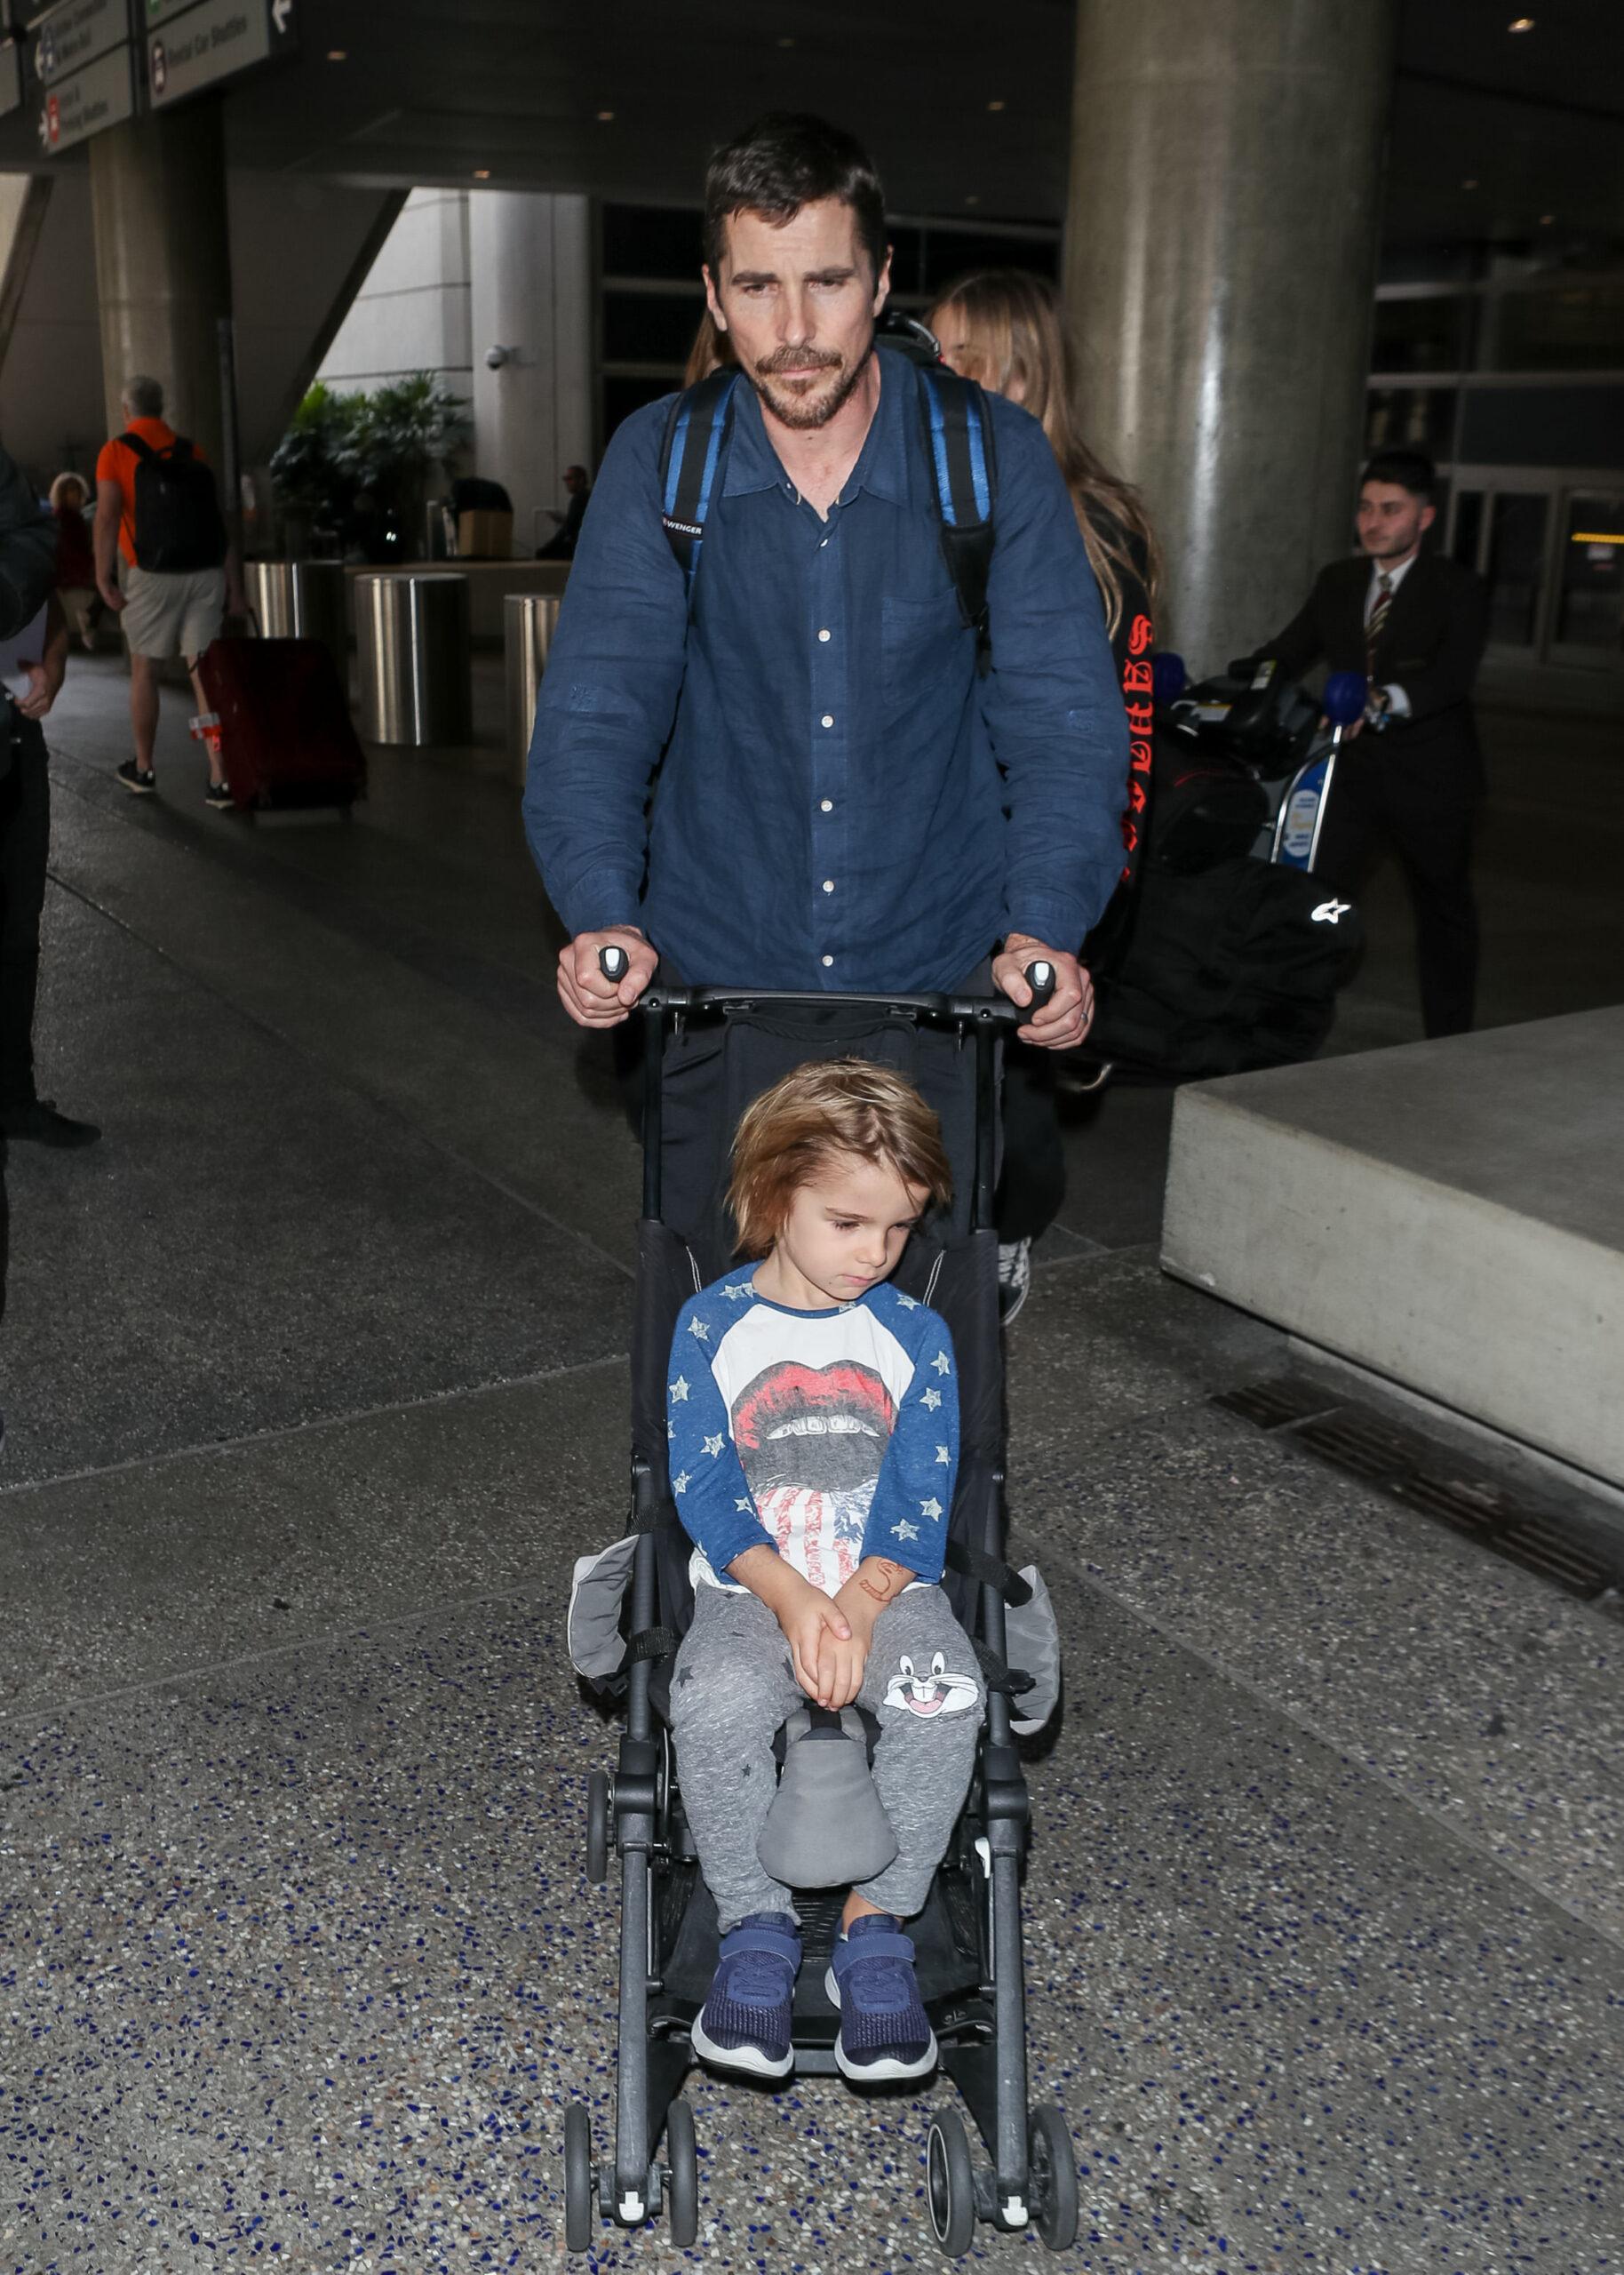 Christian Bale and his family at LAX International Airport